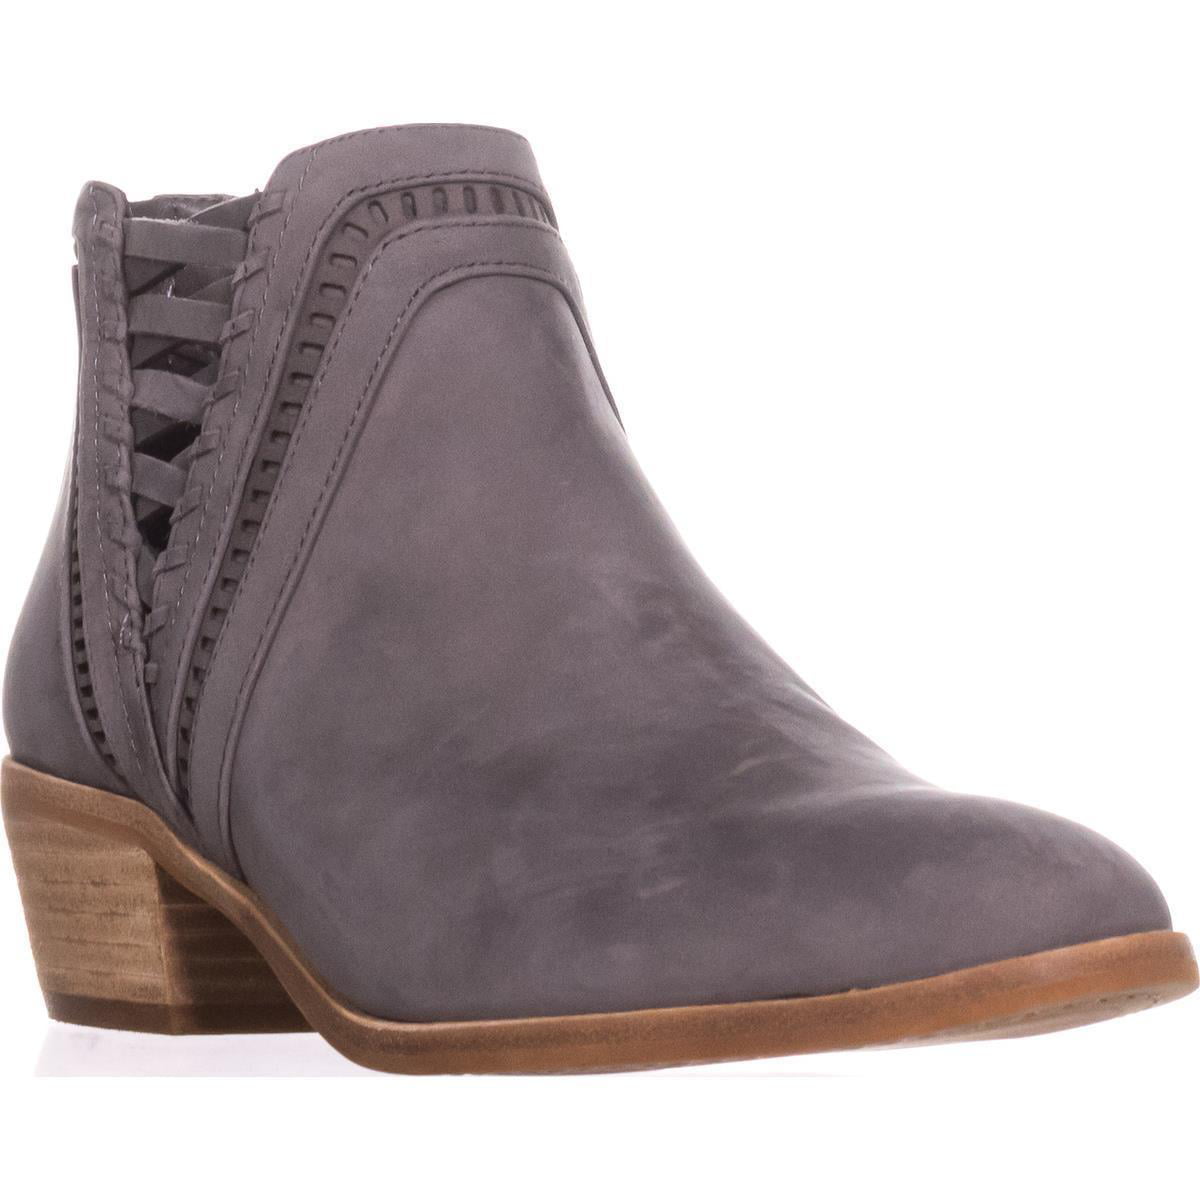 Womens Vince Camuto Pimmy Ankle Booties 